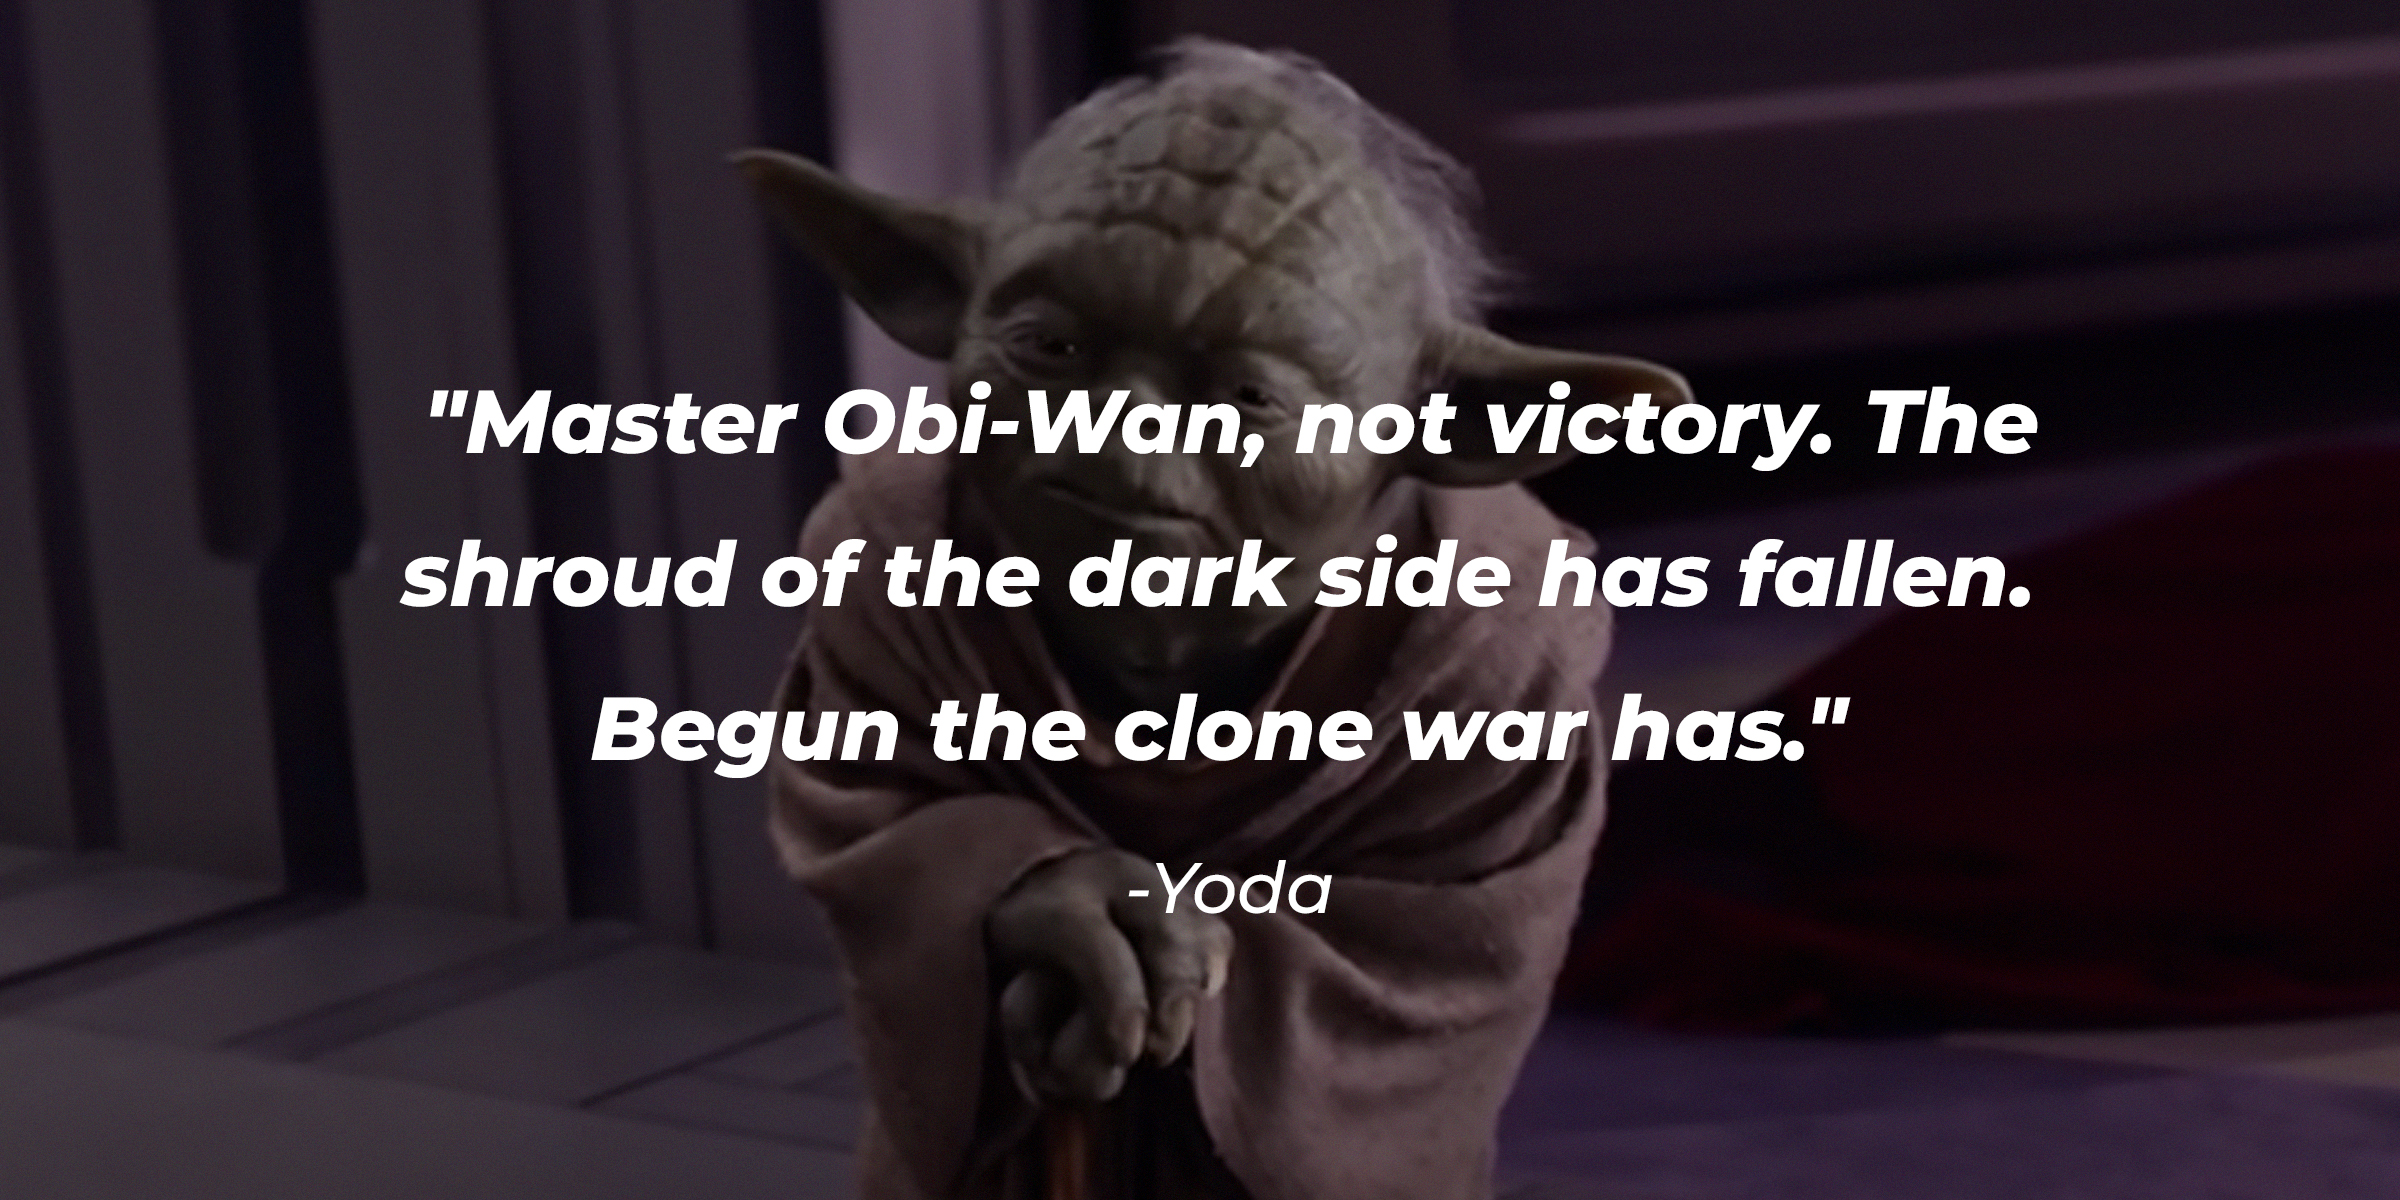 Yoda's quote from "Star Wars: Attack of the Clones": "Master Obi-Wan, not victory. The shroud of the dark side has fallen. Begun the clone war has." | Source: facebook.com/StarWars